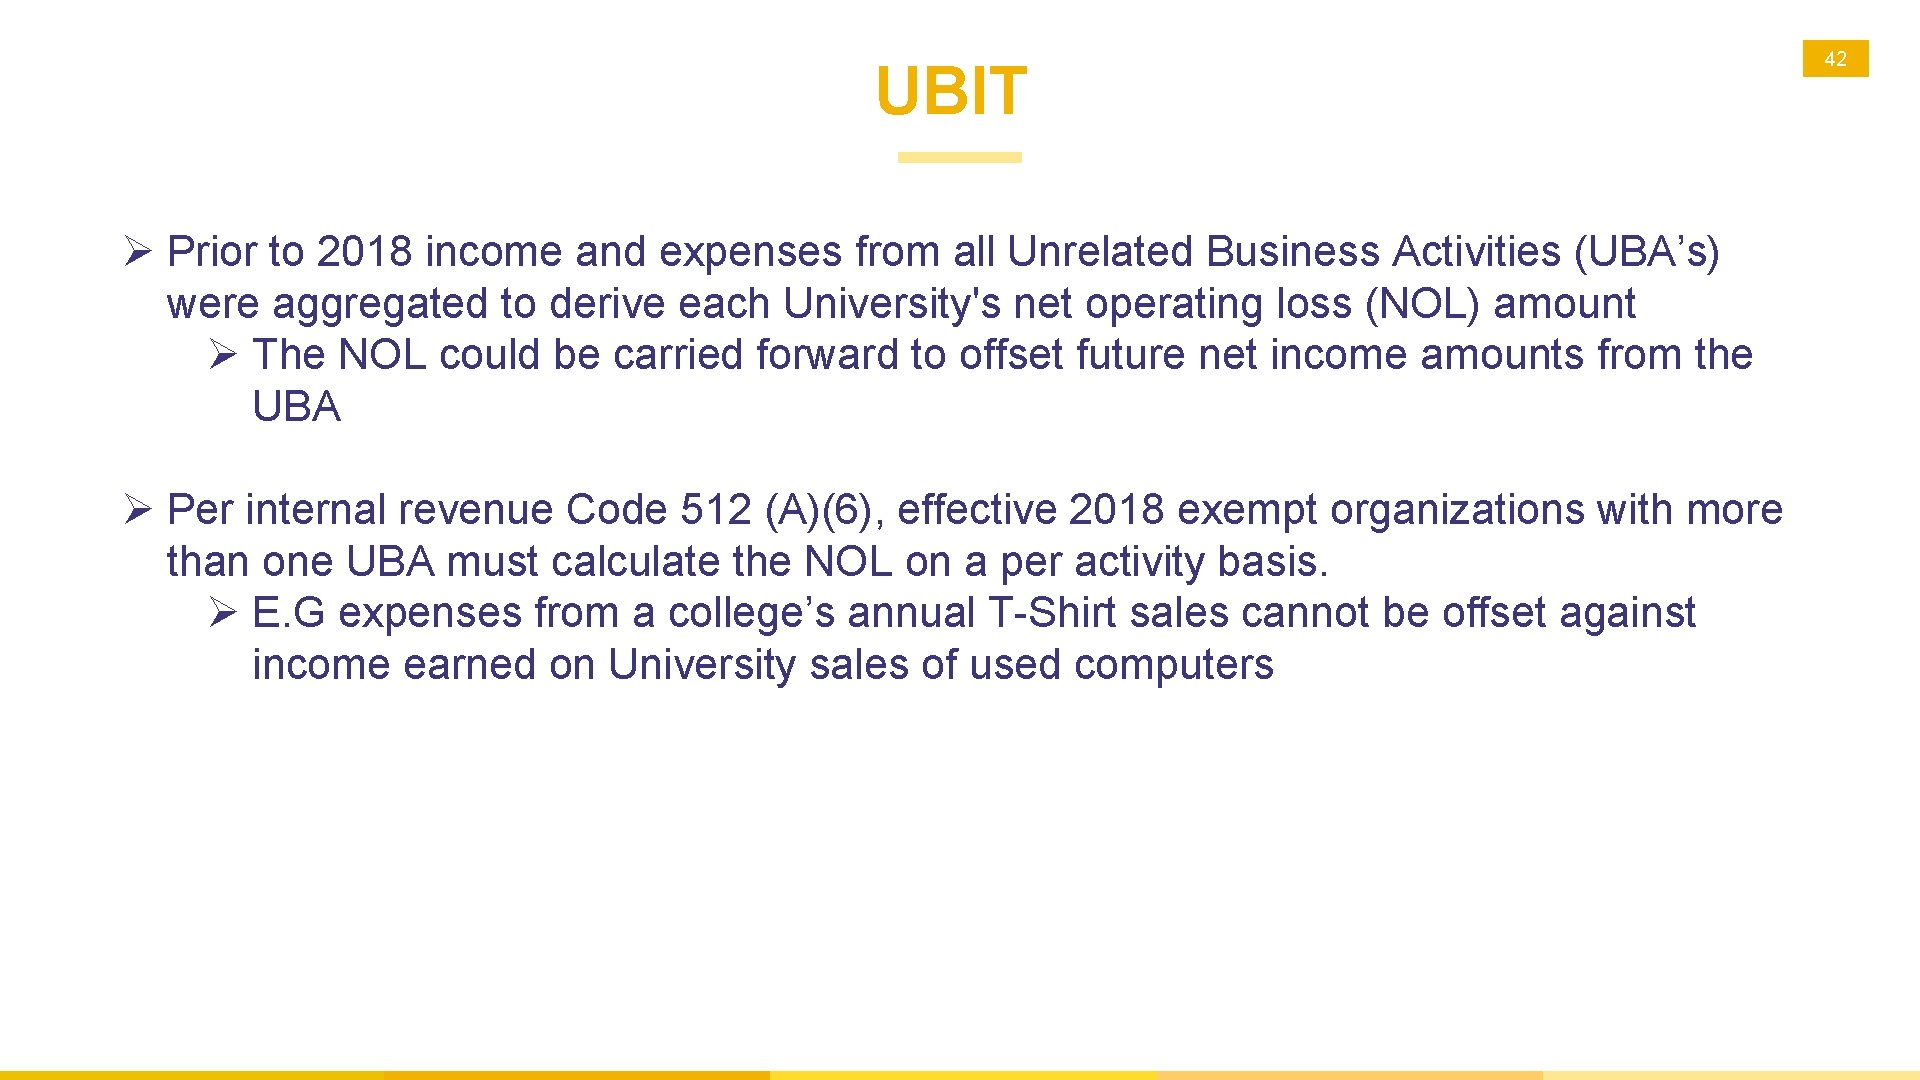 UBIT Ø Prior to 2018 income and expenses from all Unrelated Business Activities (UBA’s)